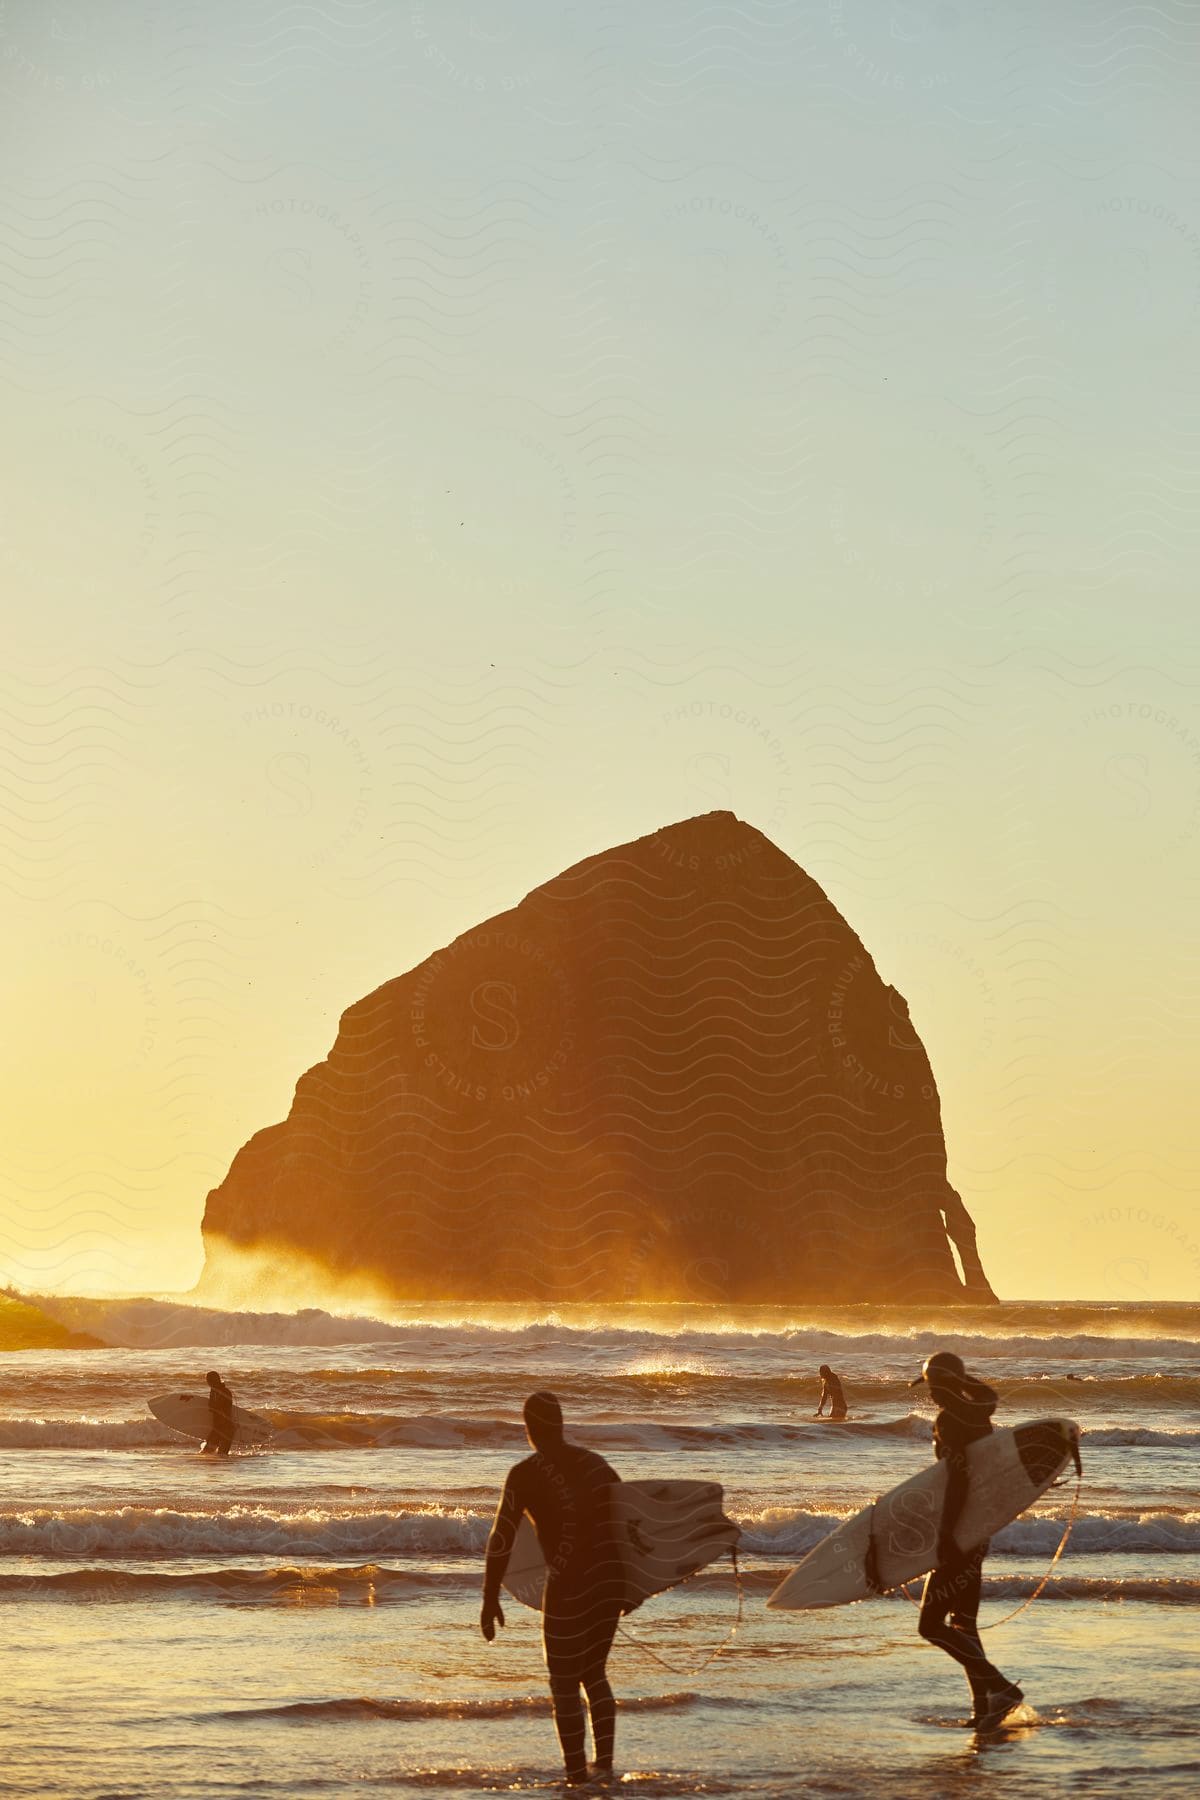 Four surfers are waiting for waves at sunset near the Haystack Rock at Cannon Beach.